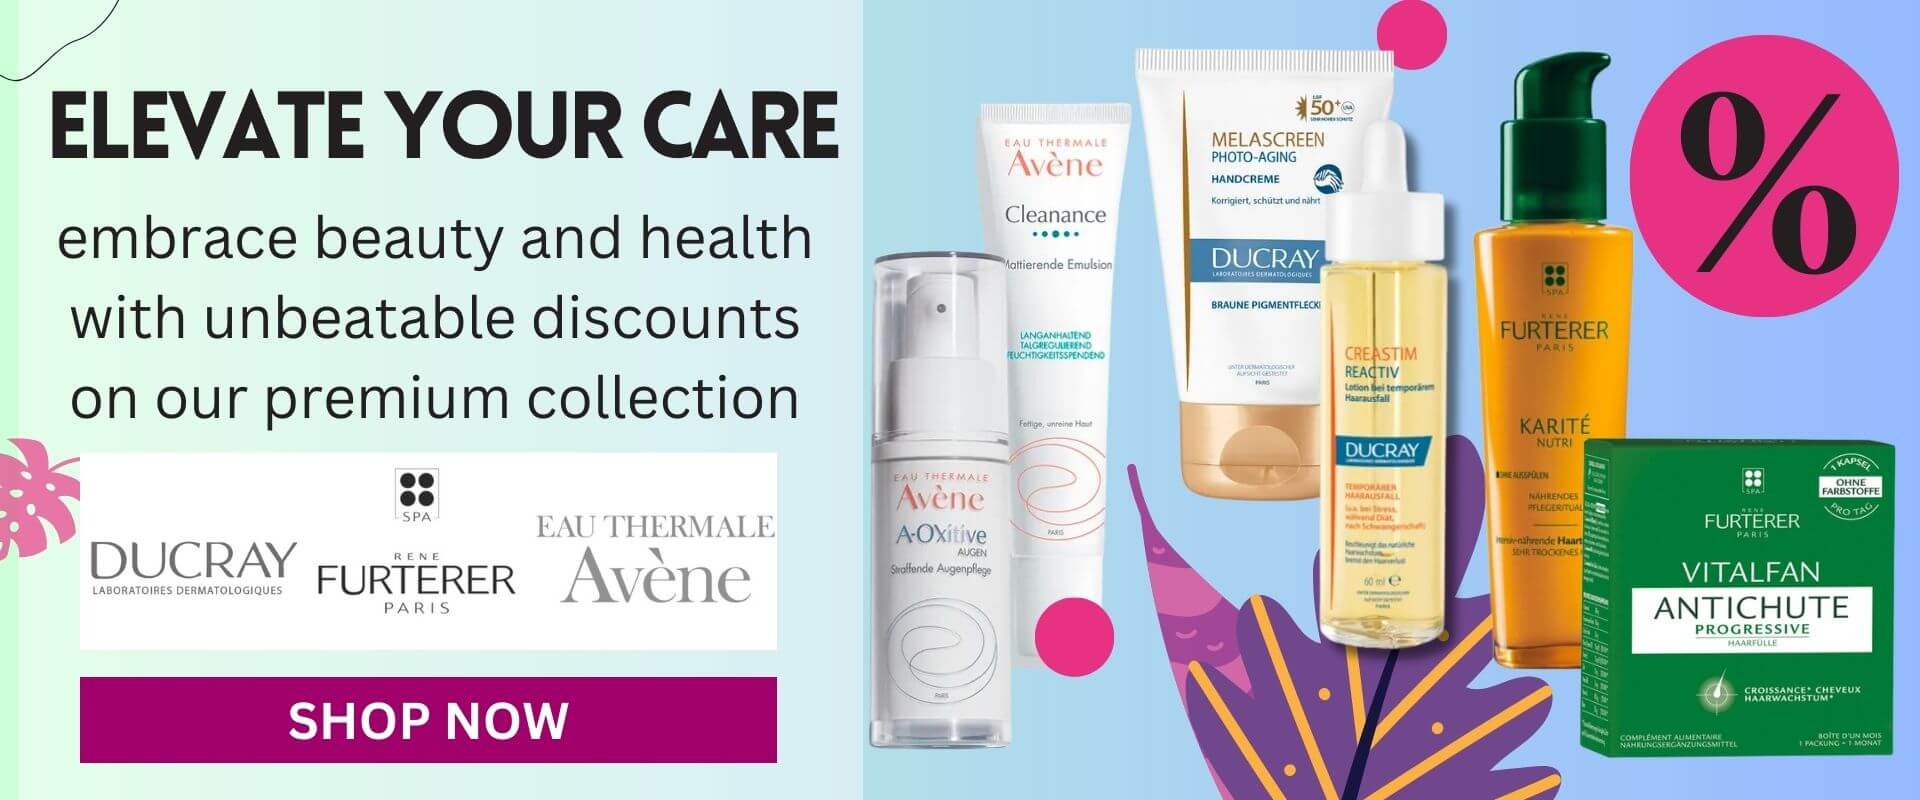 Unveil Radiant Savings: Avene, Ducray, A-Derma, and Rene Furterer Sale! Discover Your Beauty Favorites at Unbeatable Prices. Limited Time Offer. Shop Now and Reveal Your Best Self!